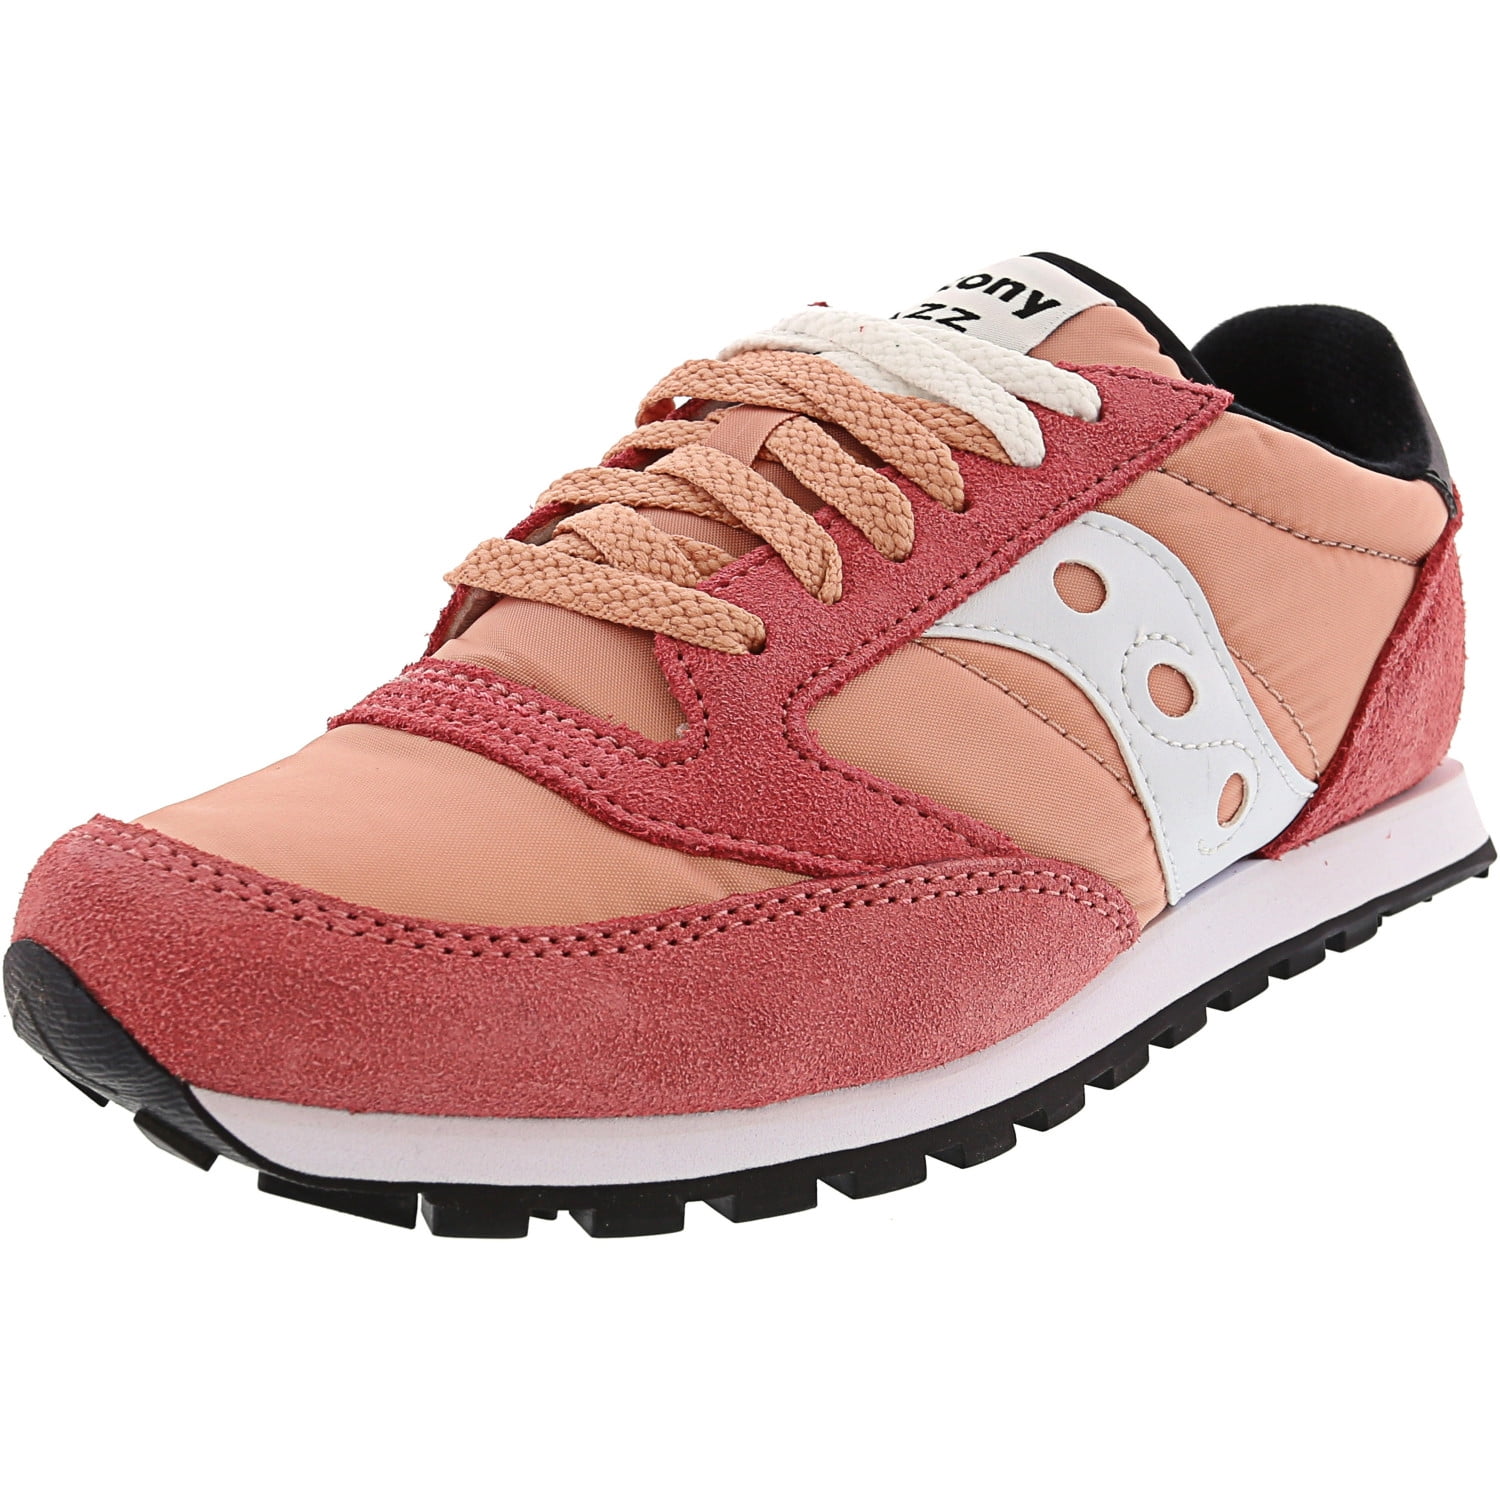 Coral/White Ankle-High Walking - 11M 